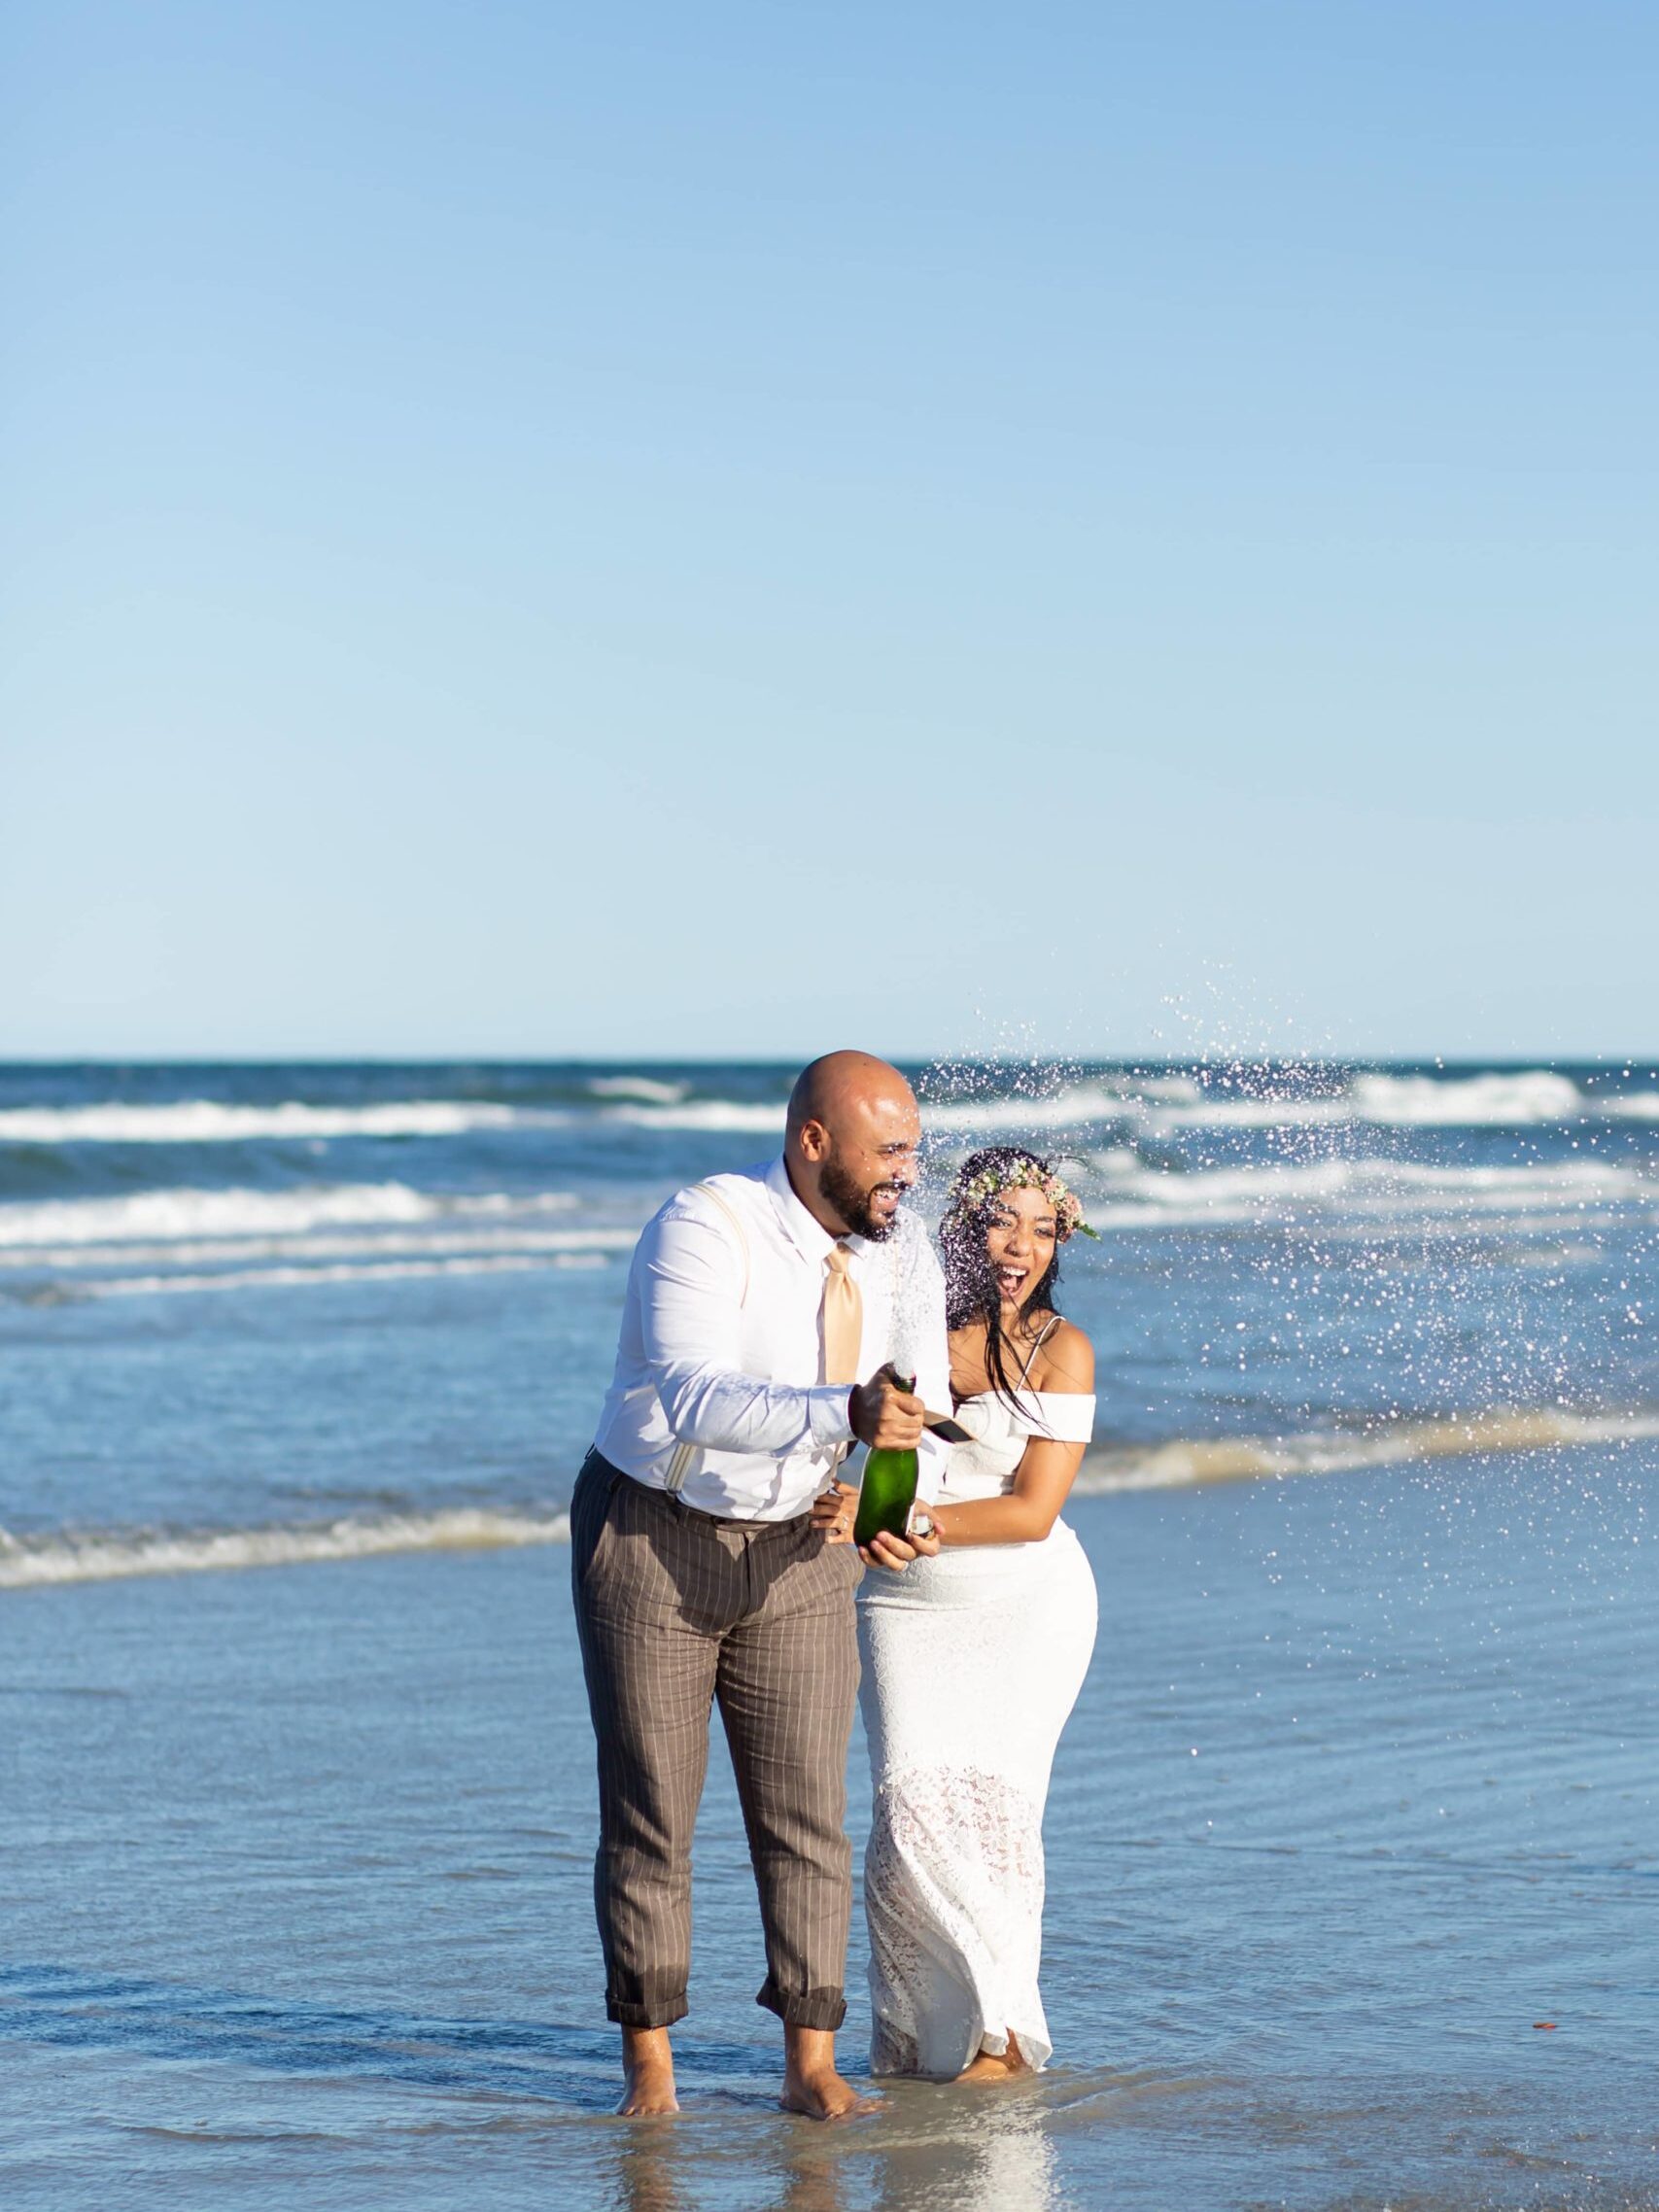 Bride & Groom doing a champagne pop in the ocean to celebrate elopement